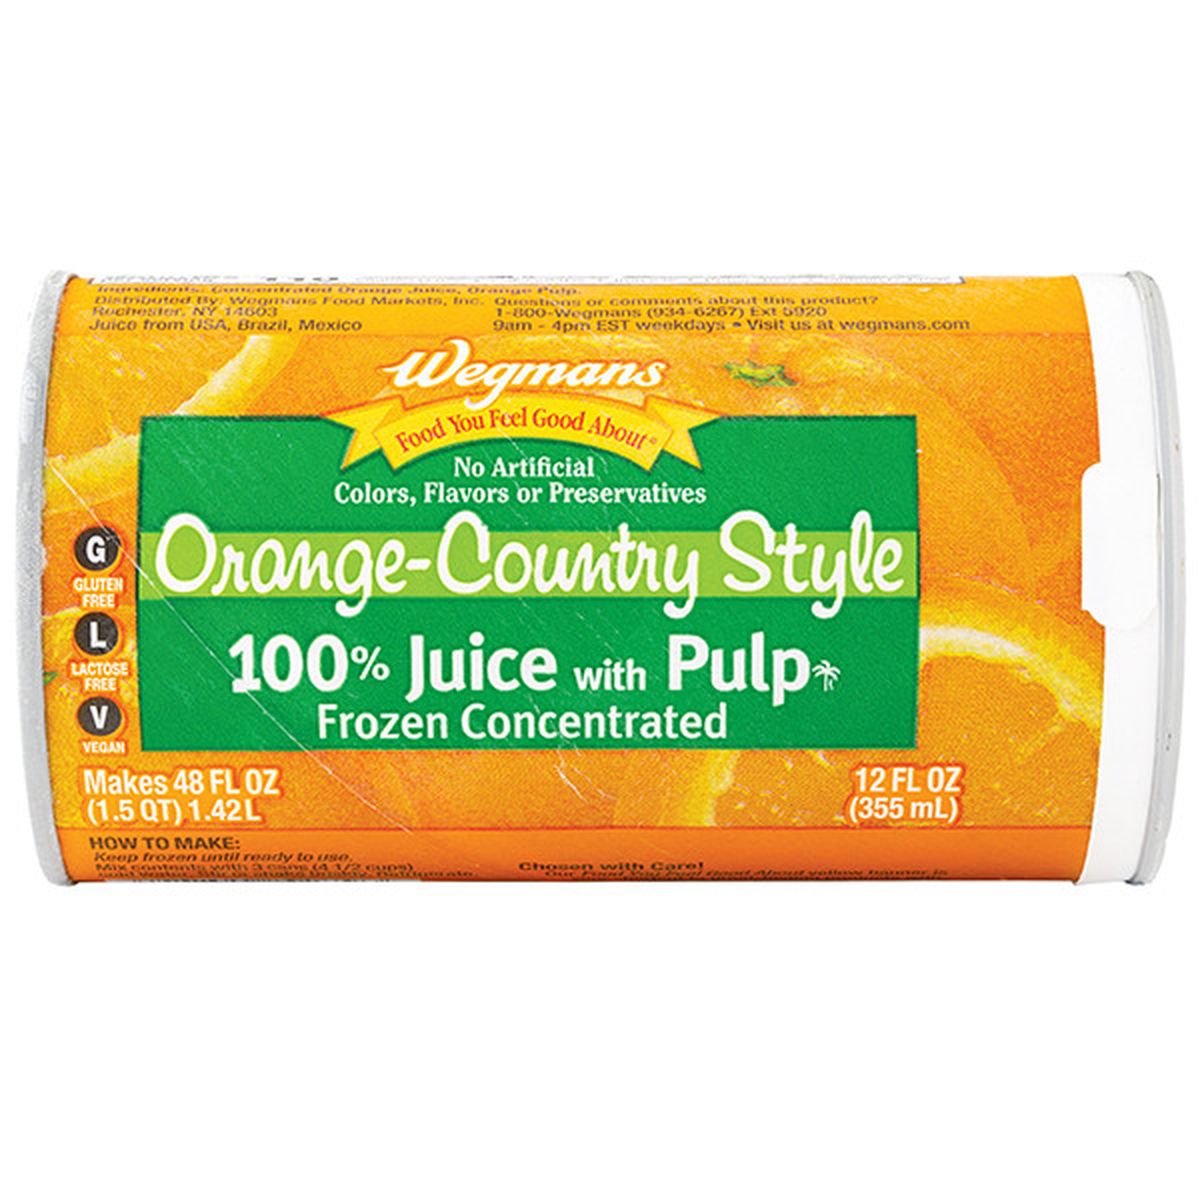 Calories in Wegmans 100% Juice, Orange-Country Style with Pulp, Frozen Concentrated